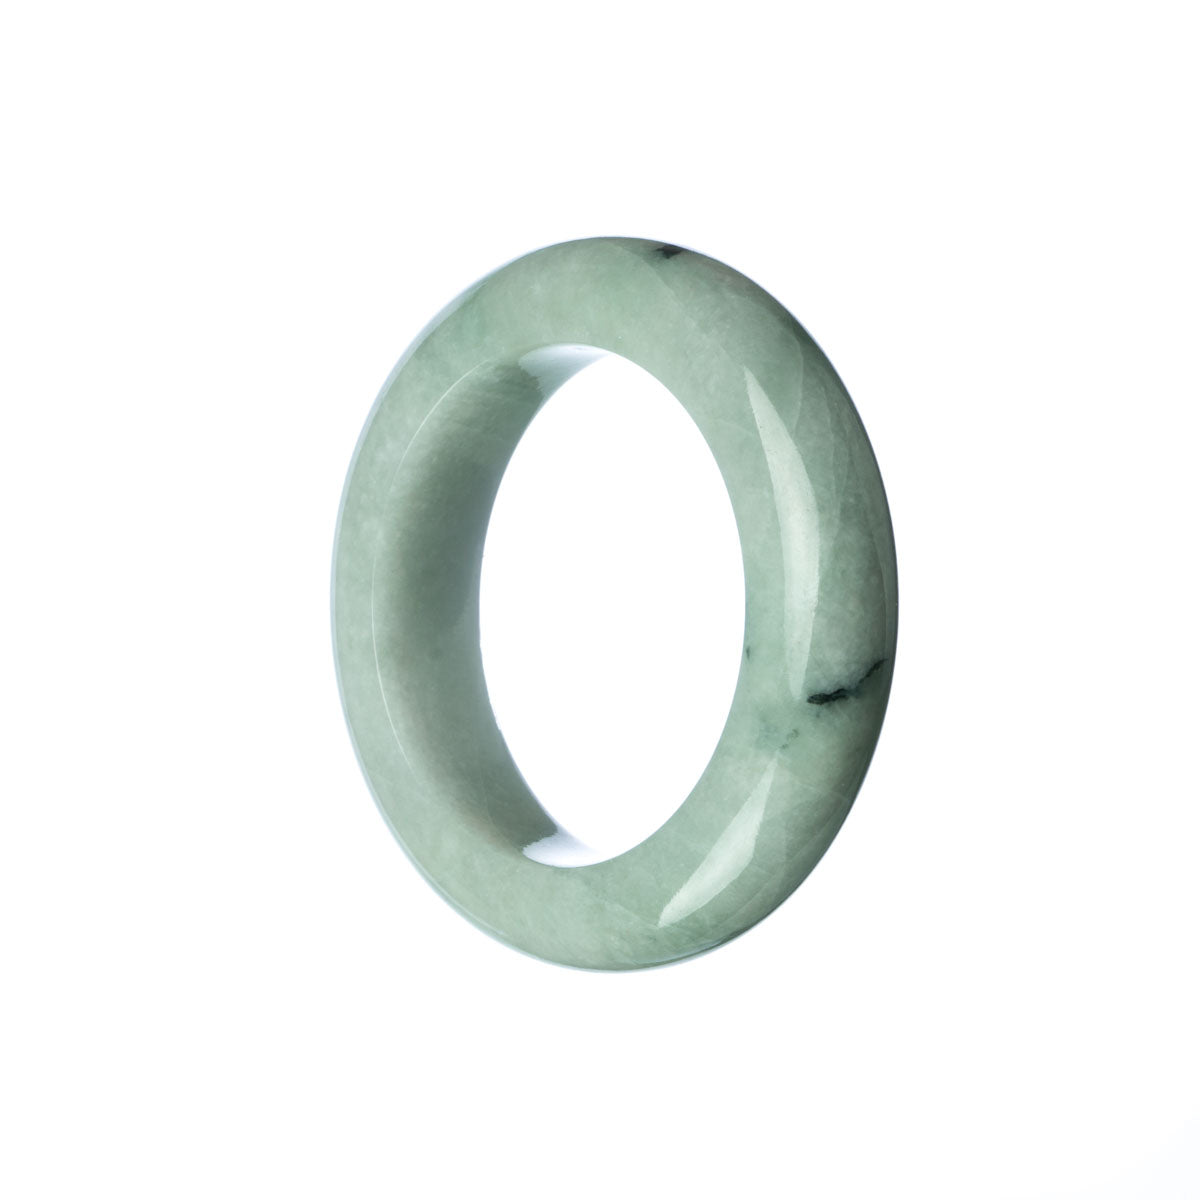 A pale green traditional jade bangle bracelet designed for children, with an authentic untreated finish.